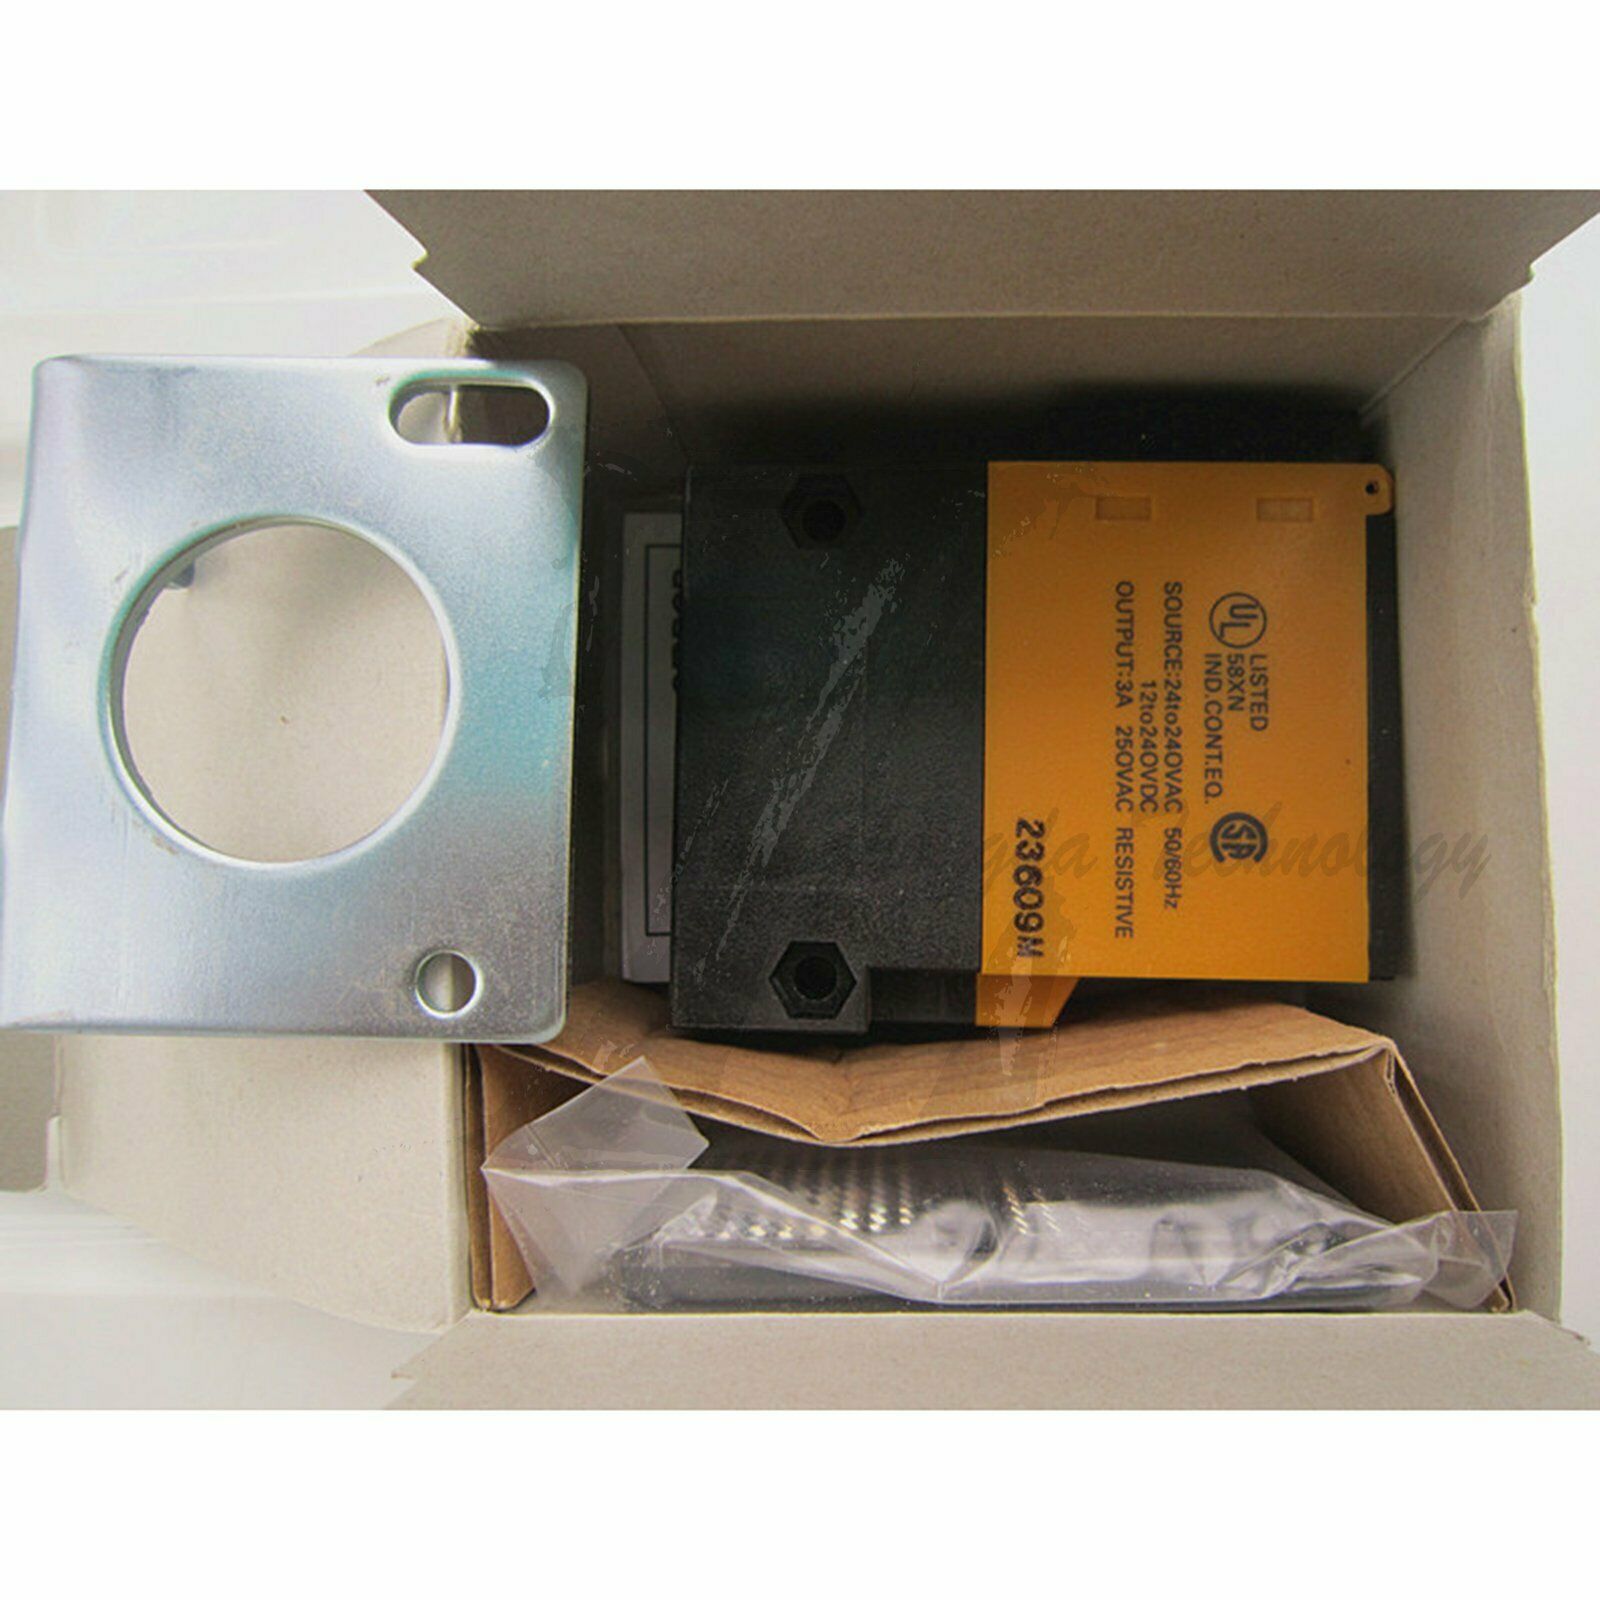 NEW Omron photoelectric switch E3B2-R5M4D-US-3